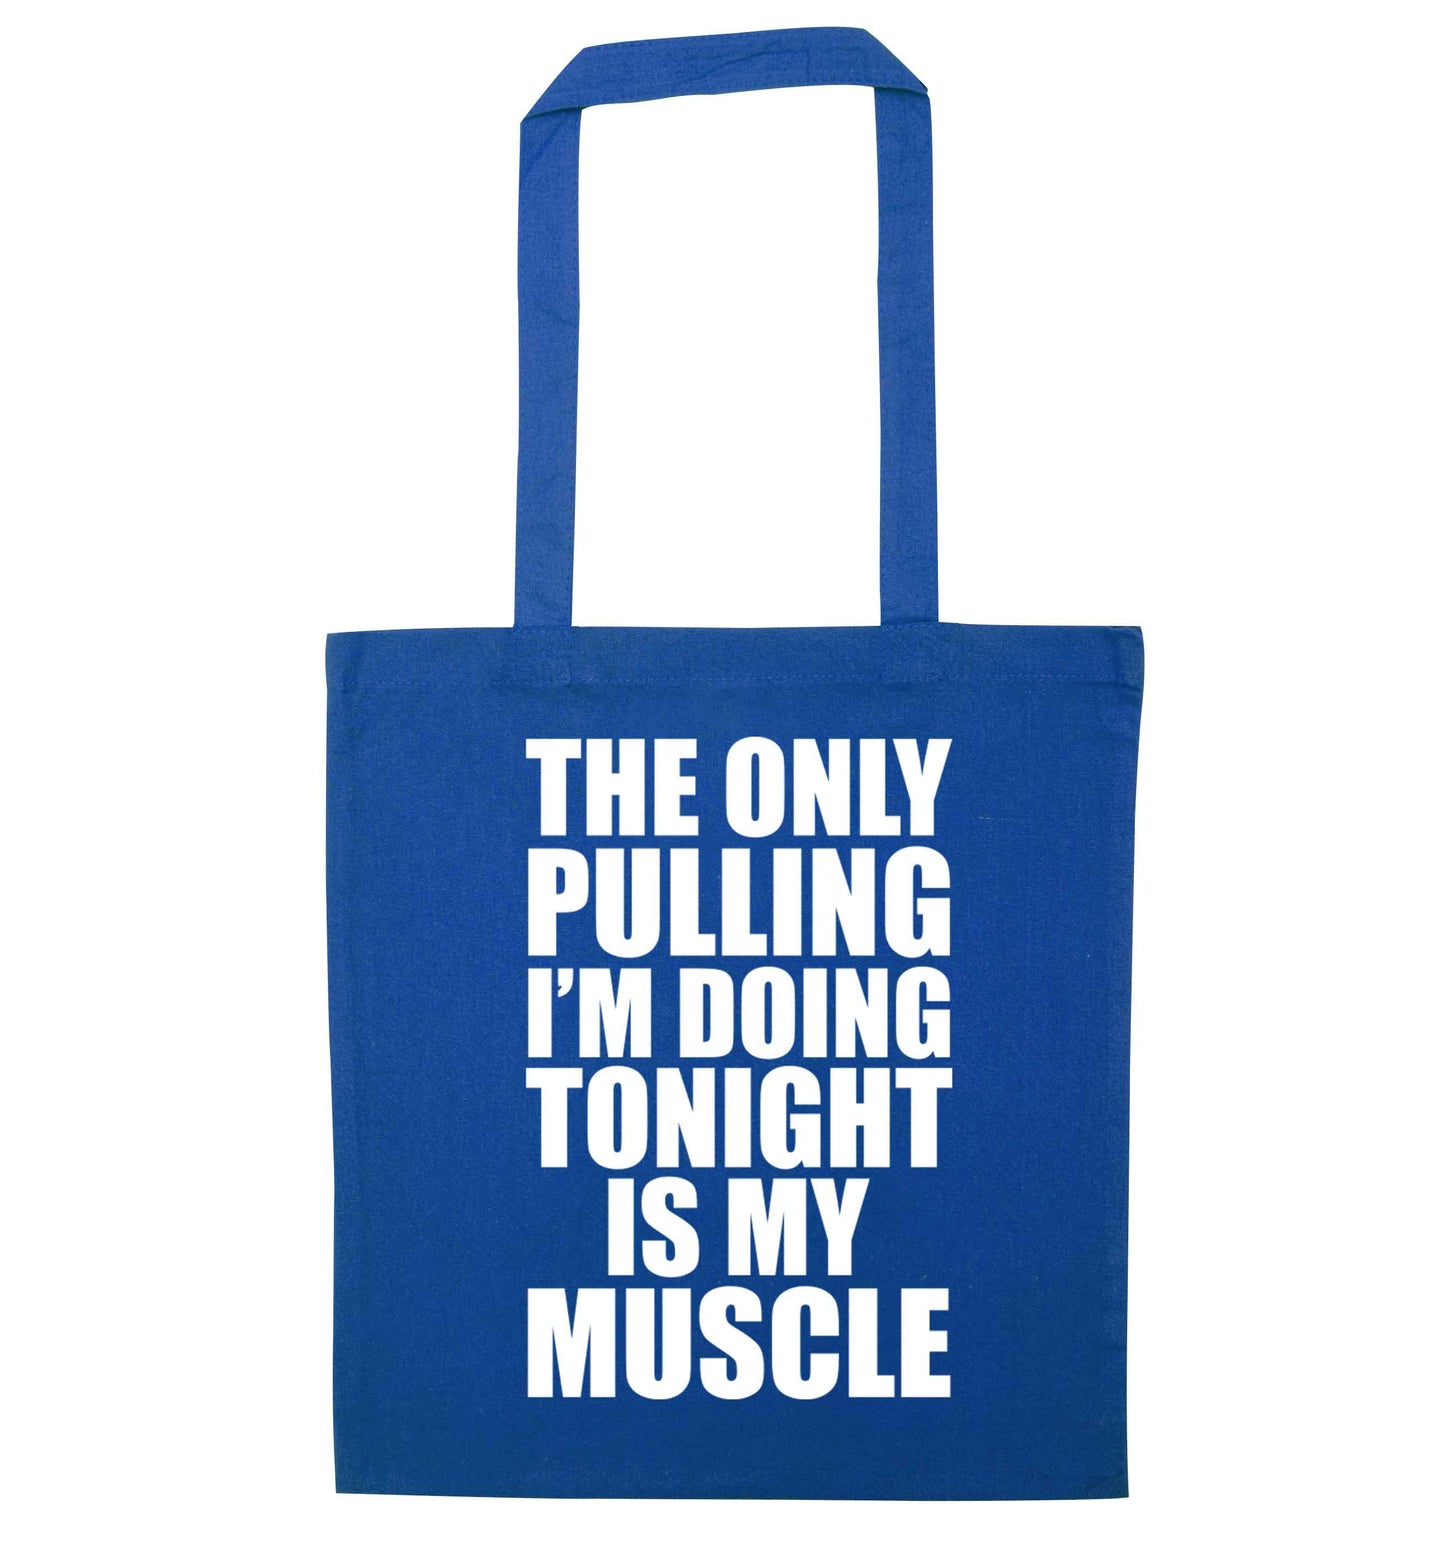 The only pulling I'm doing tonight is my muscle blue tote bag